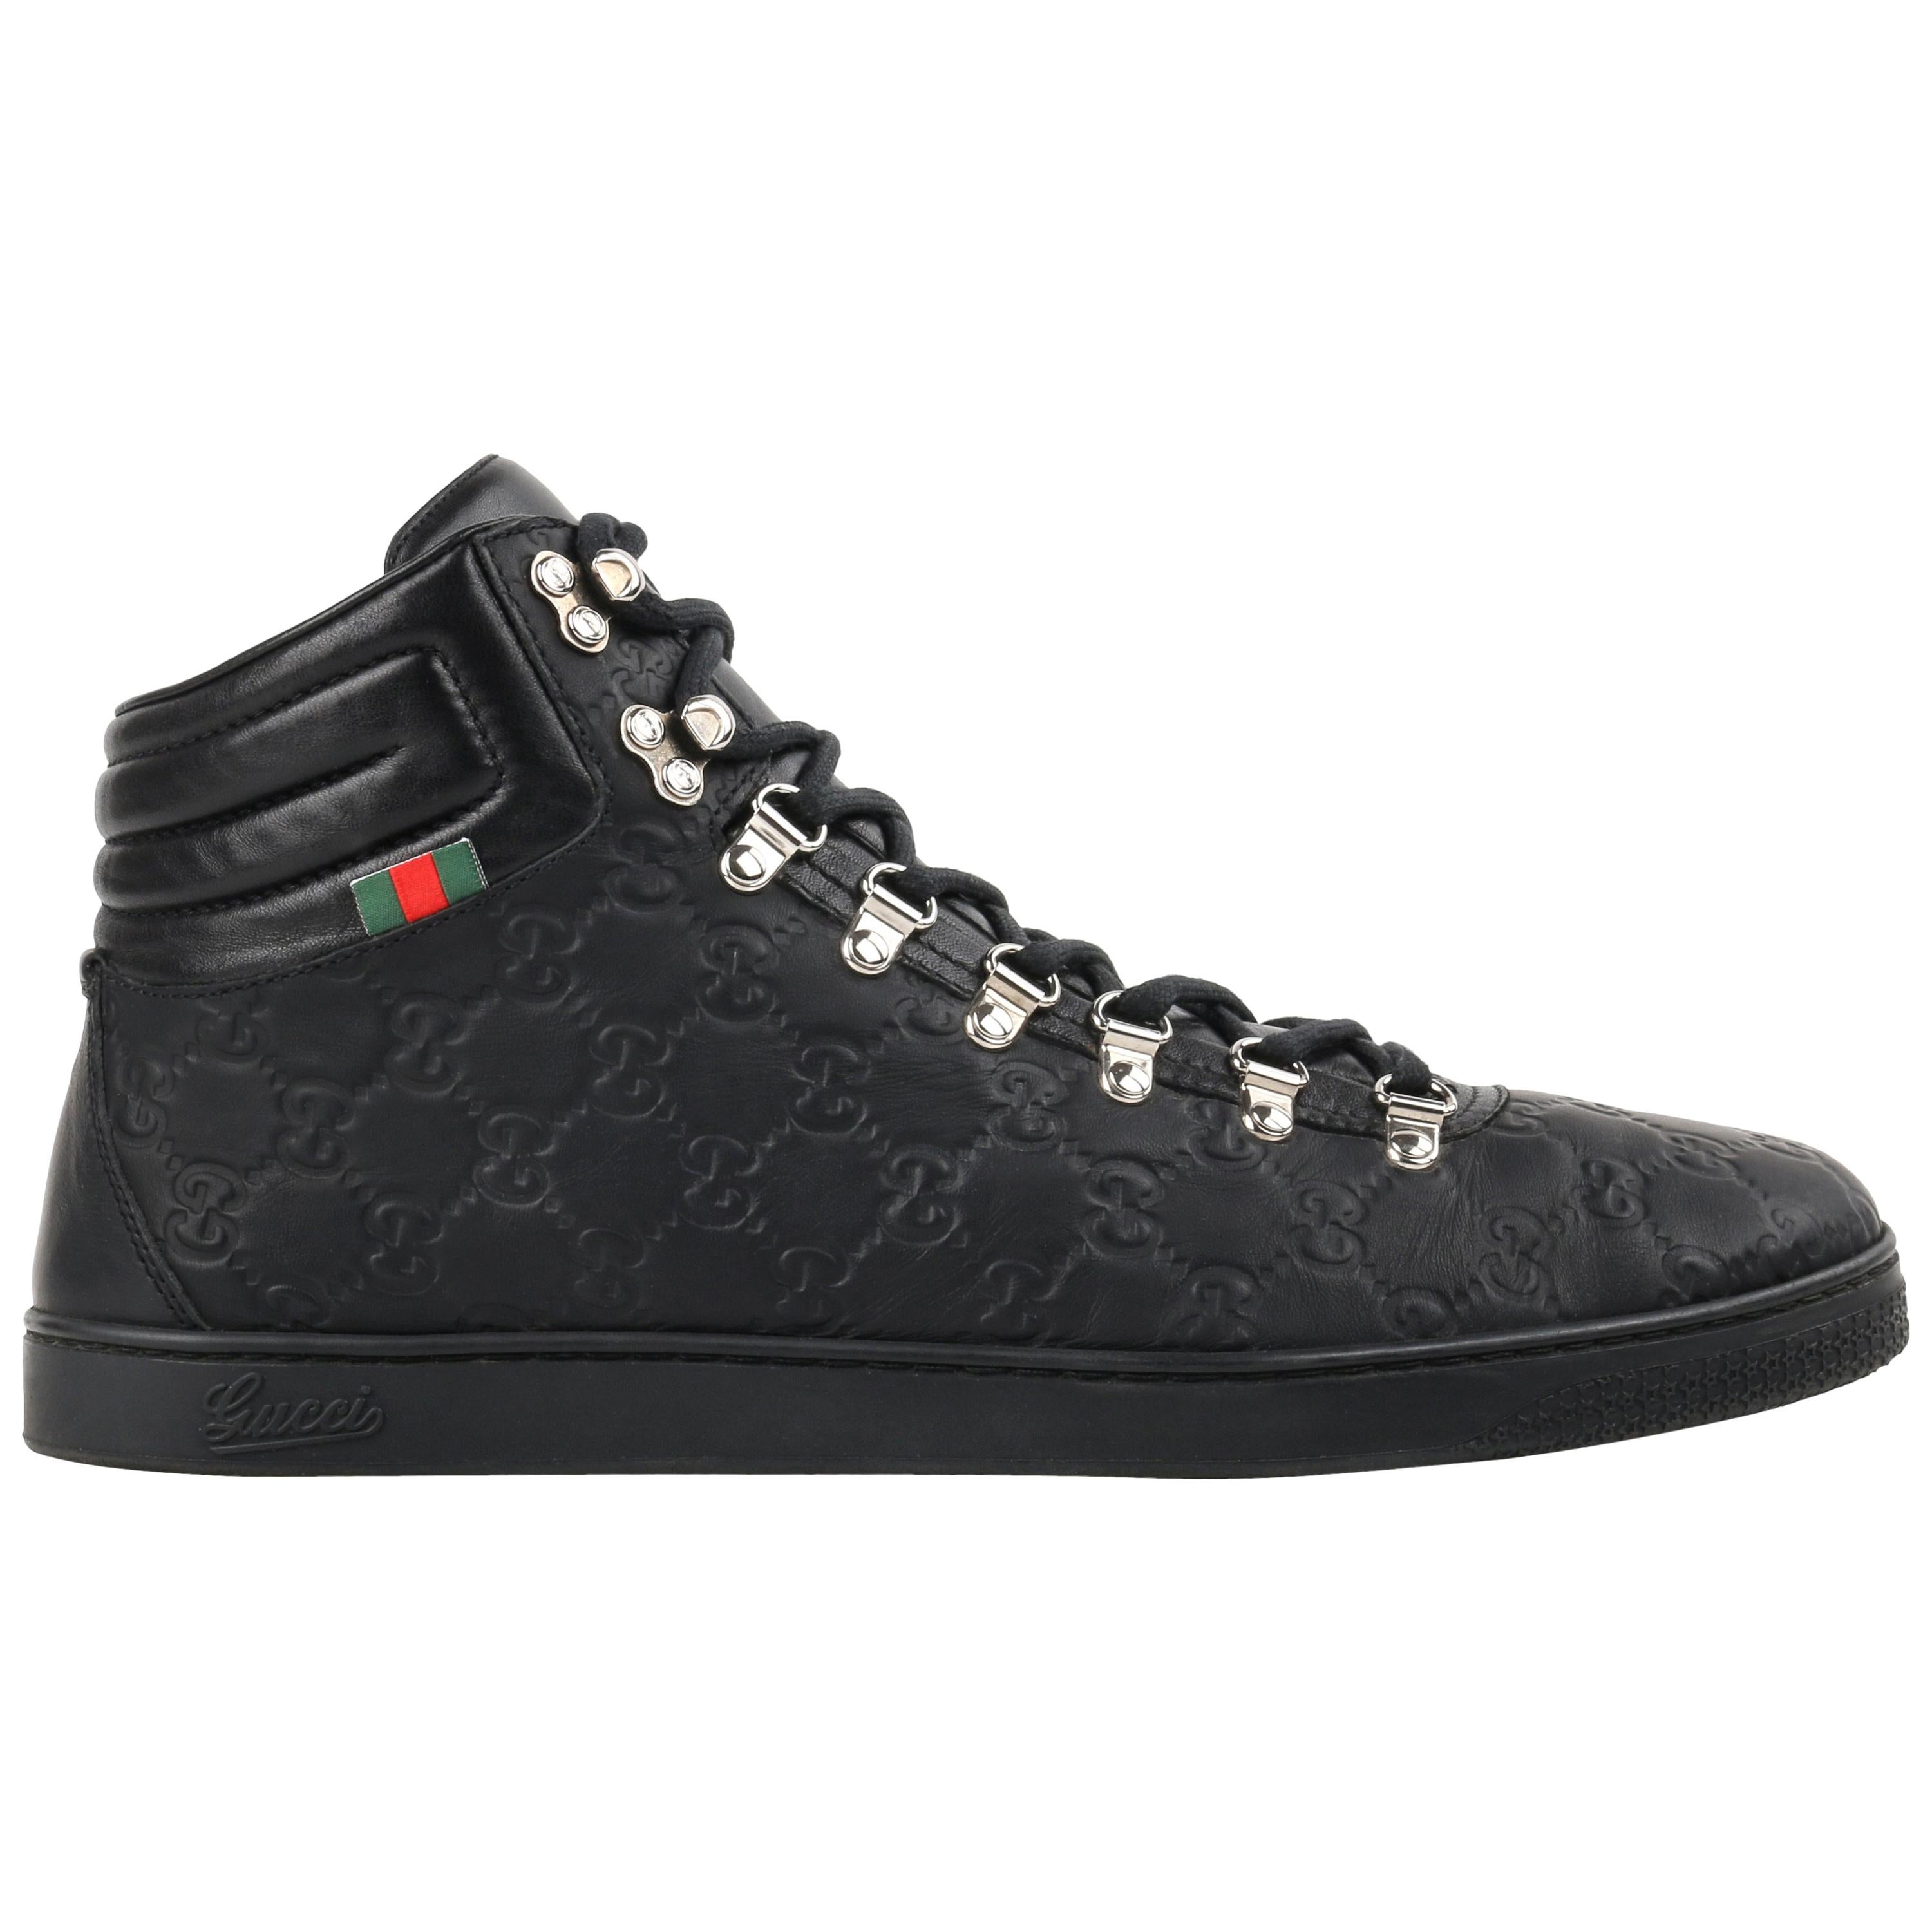 Gucci - classic monogram - Lace-up shoes, Sneakers - Size: - Catawiki